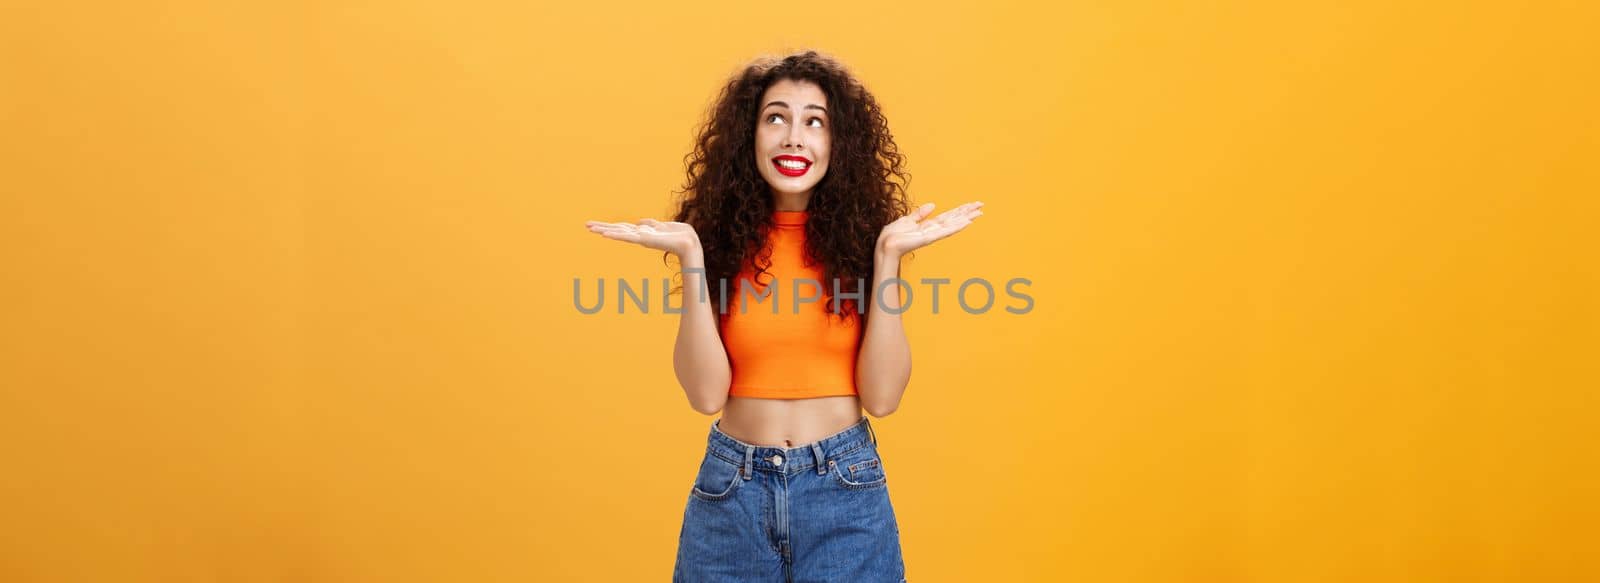 Silly and clueless carefree cute girl. with curly hairstyle in cropped top and shorts shrugging with palms spread aside smiling unaware and gazing at upper right corner uncertain and uninvolved.